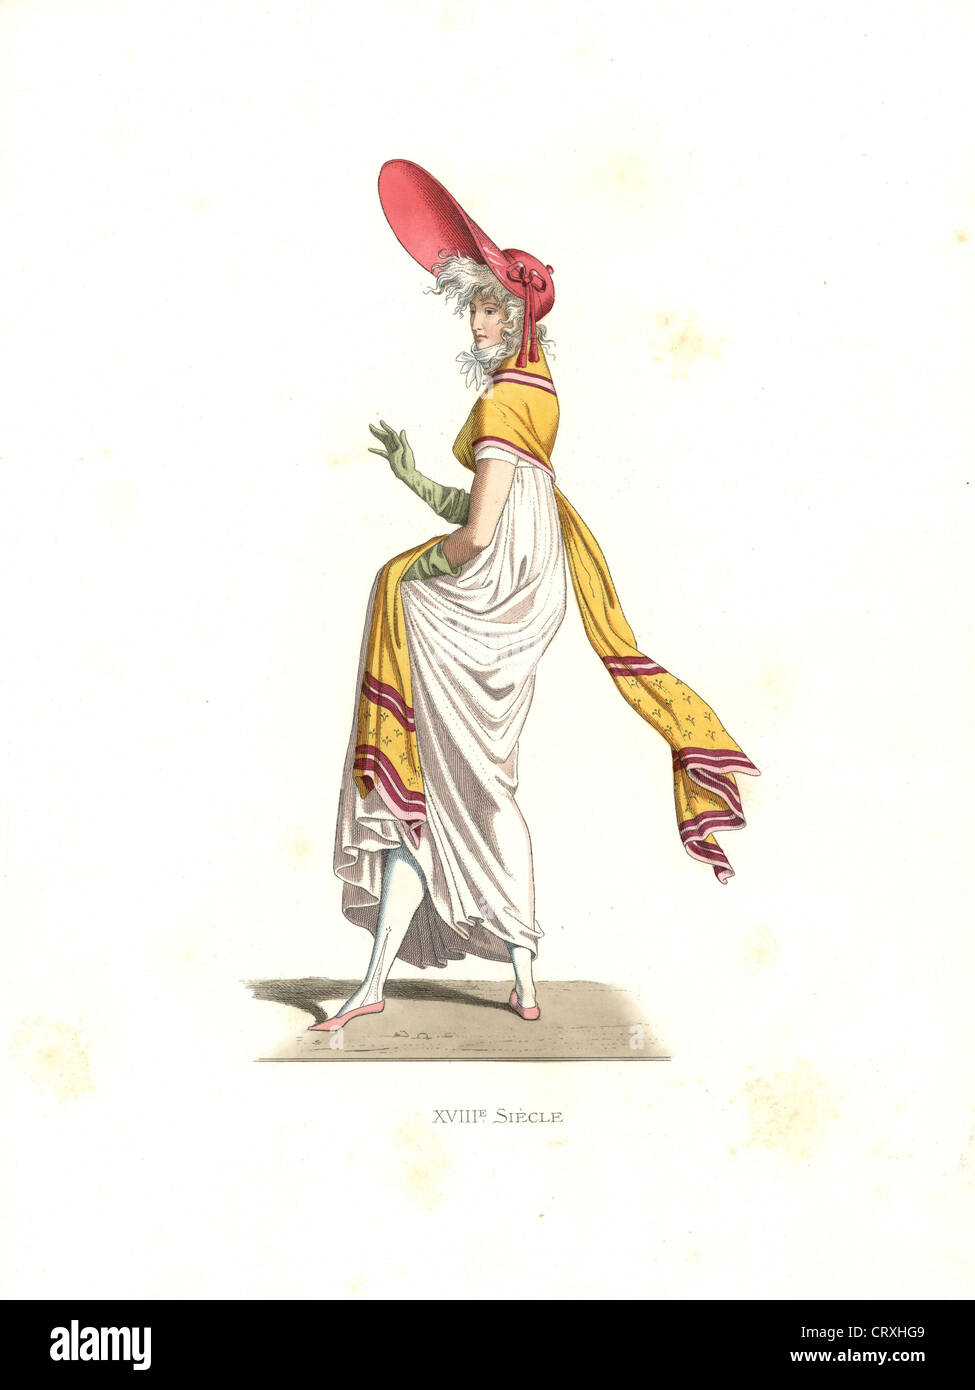 Fashionable woman Merveilleuse, France, 18th century, from a print by Carle Vernet. Stock Photo